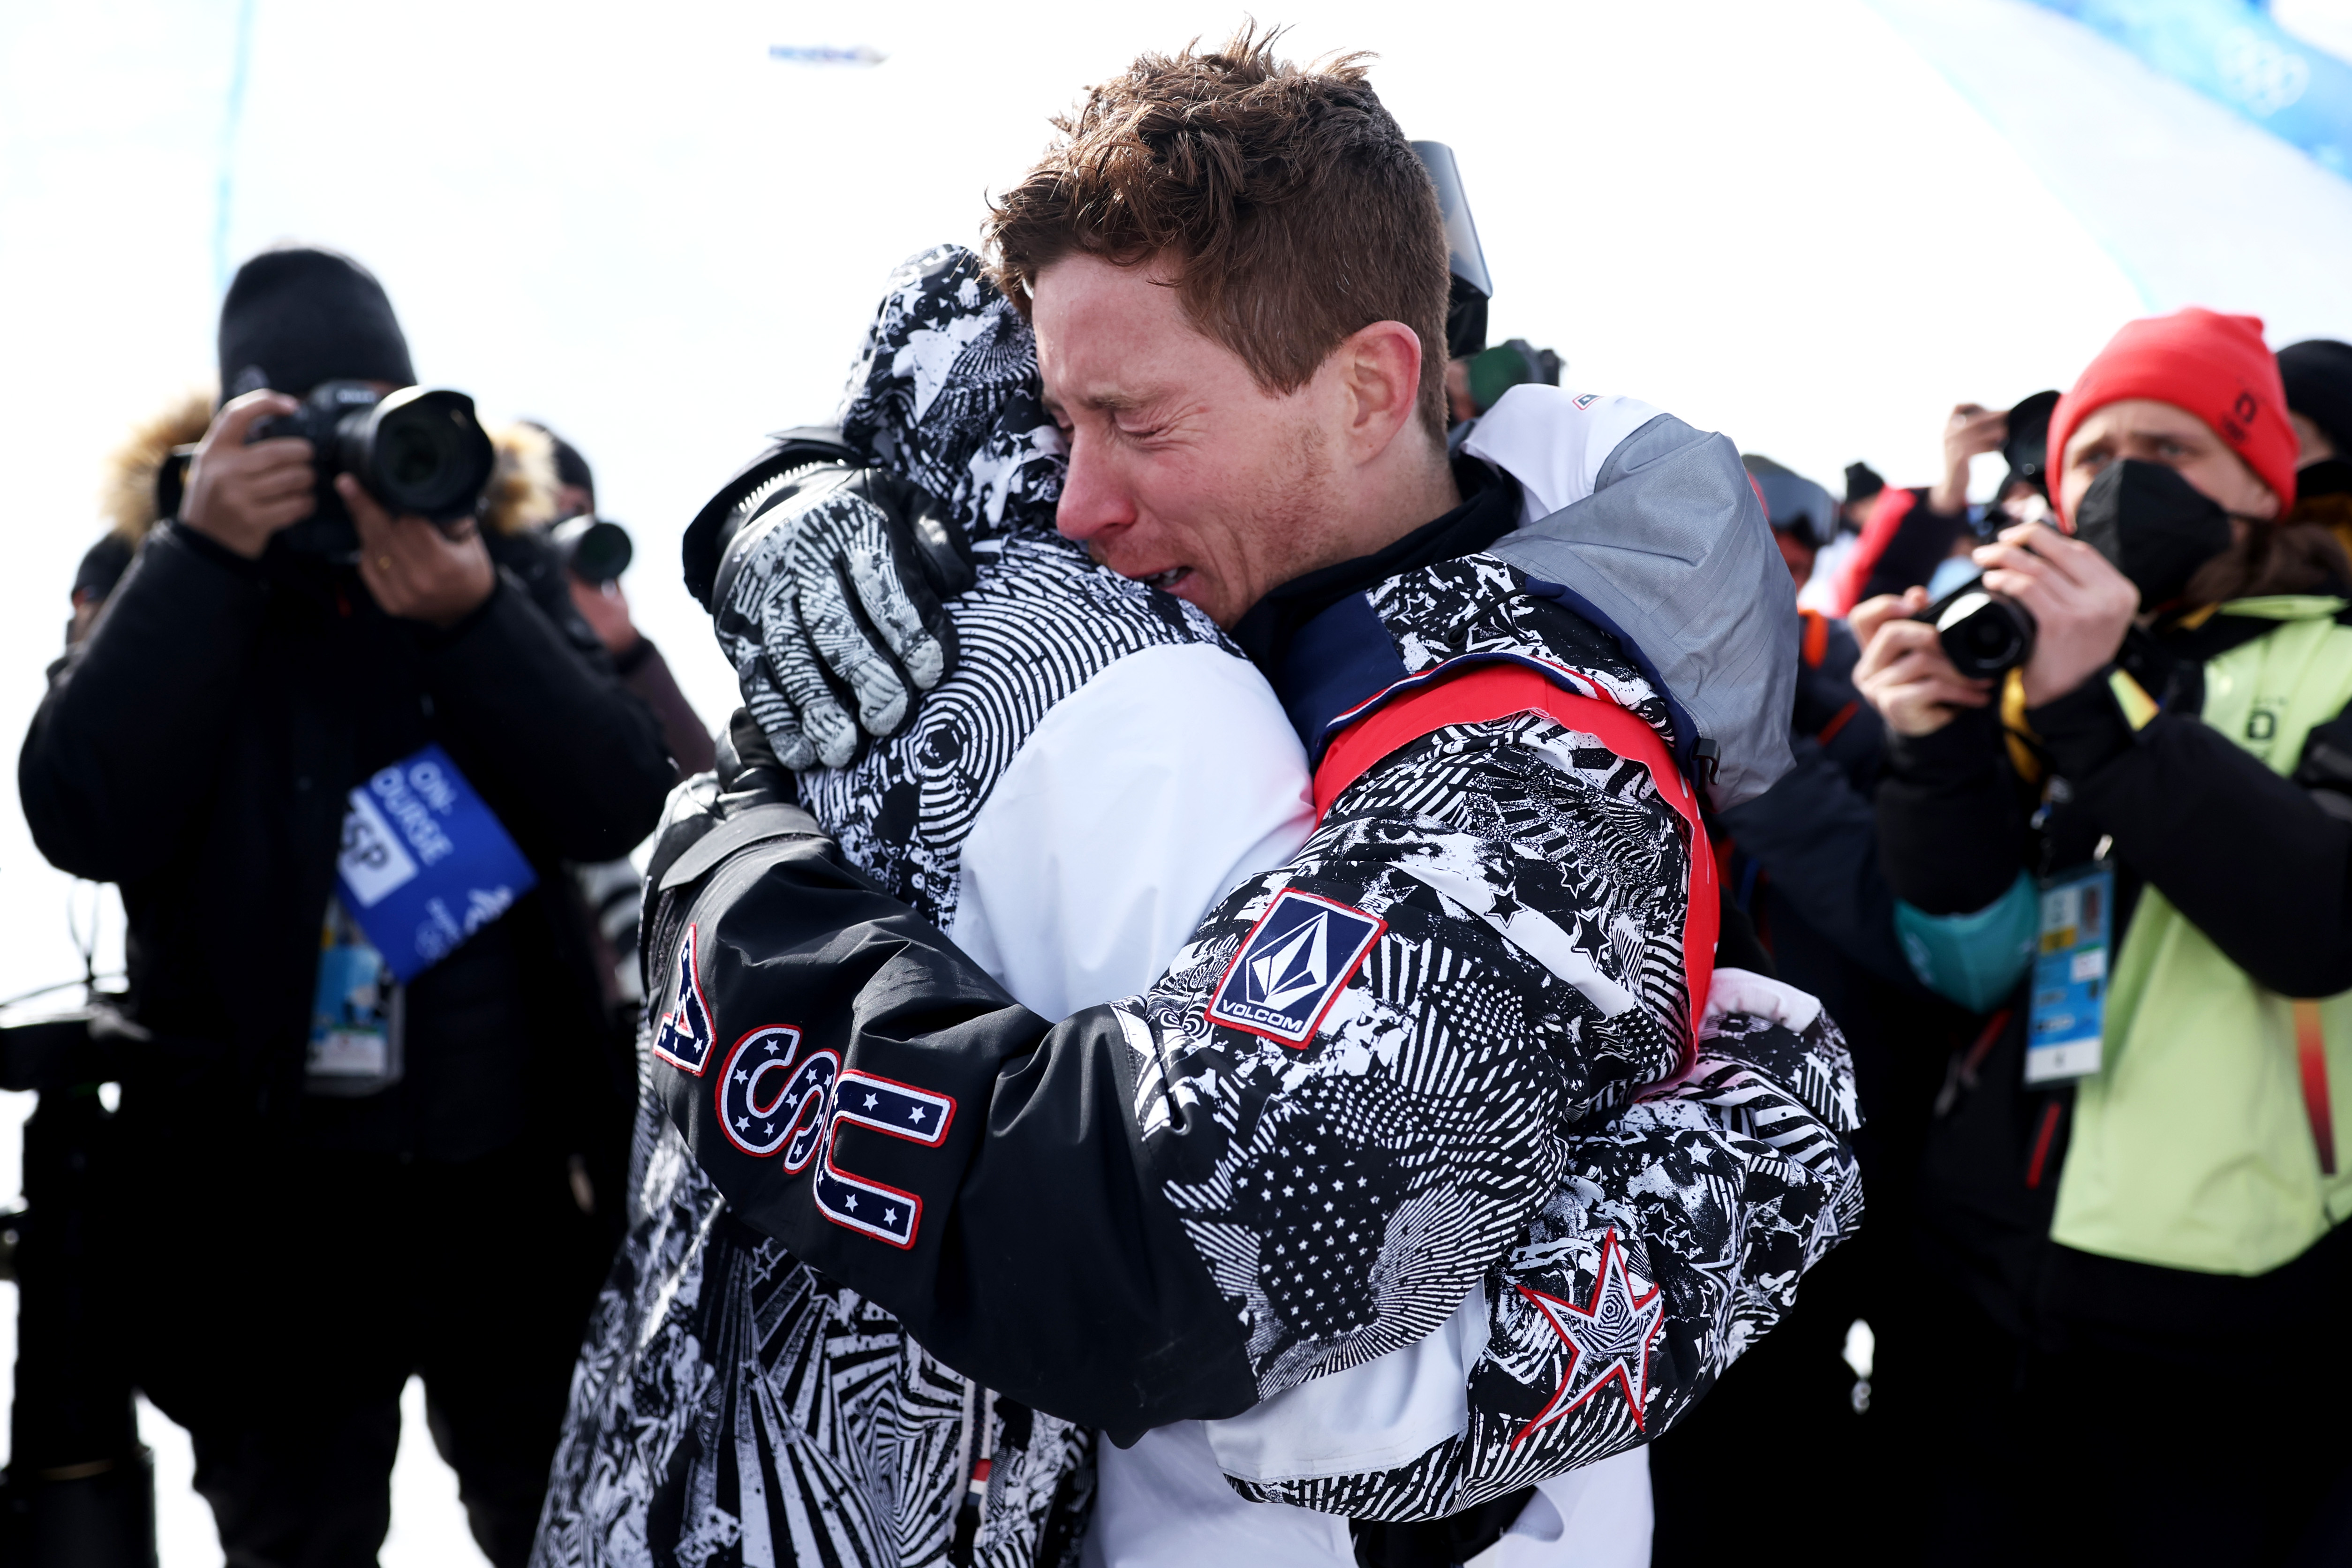 After win, Shaun White has sights set on Olympics